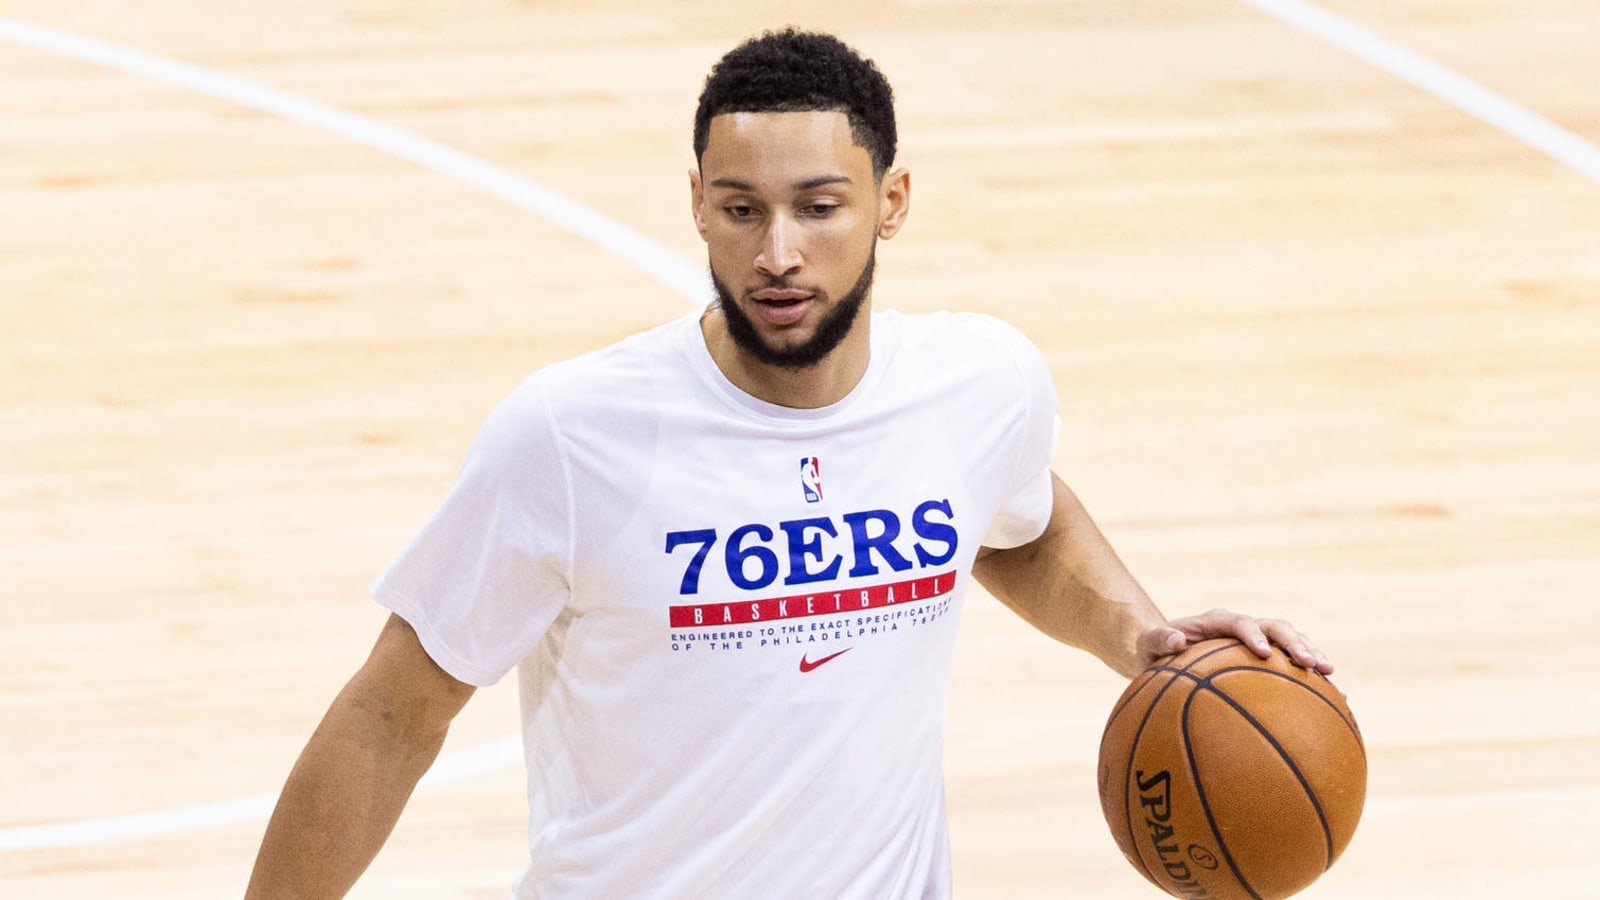 76ers fan heckled Rich Paul to 'get Ben Simmons out of Philly'